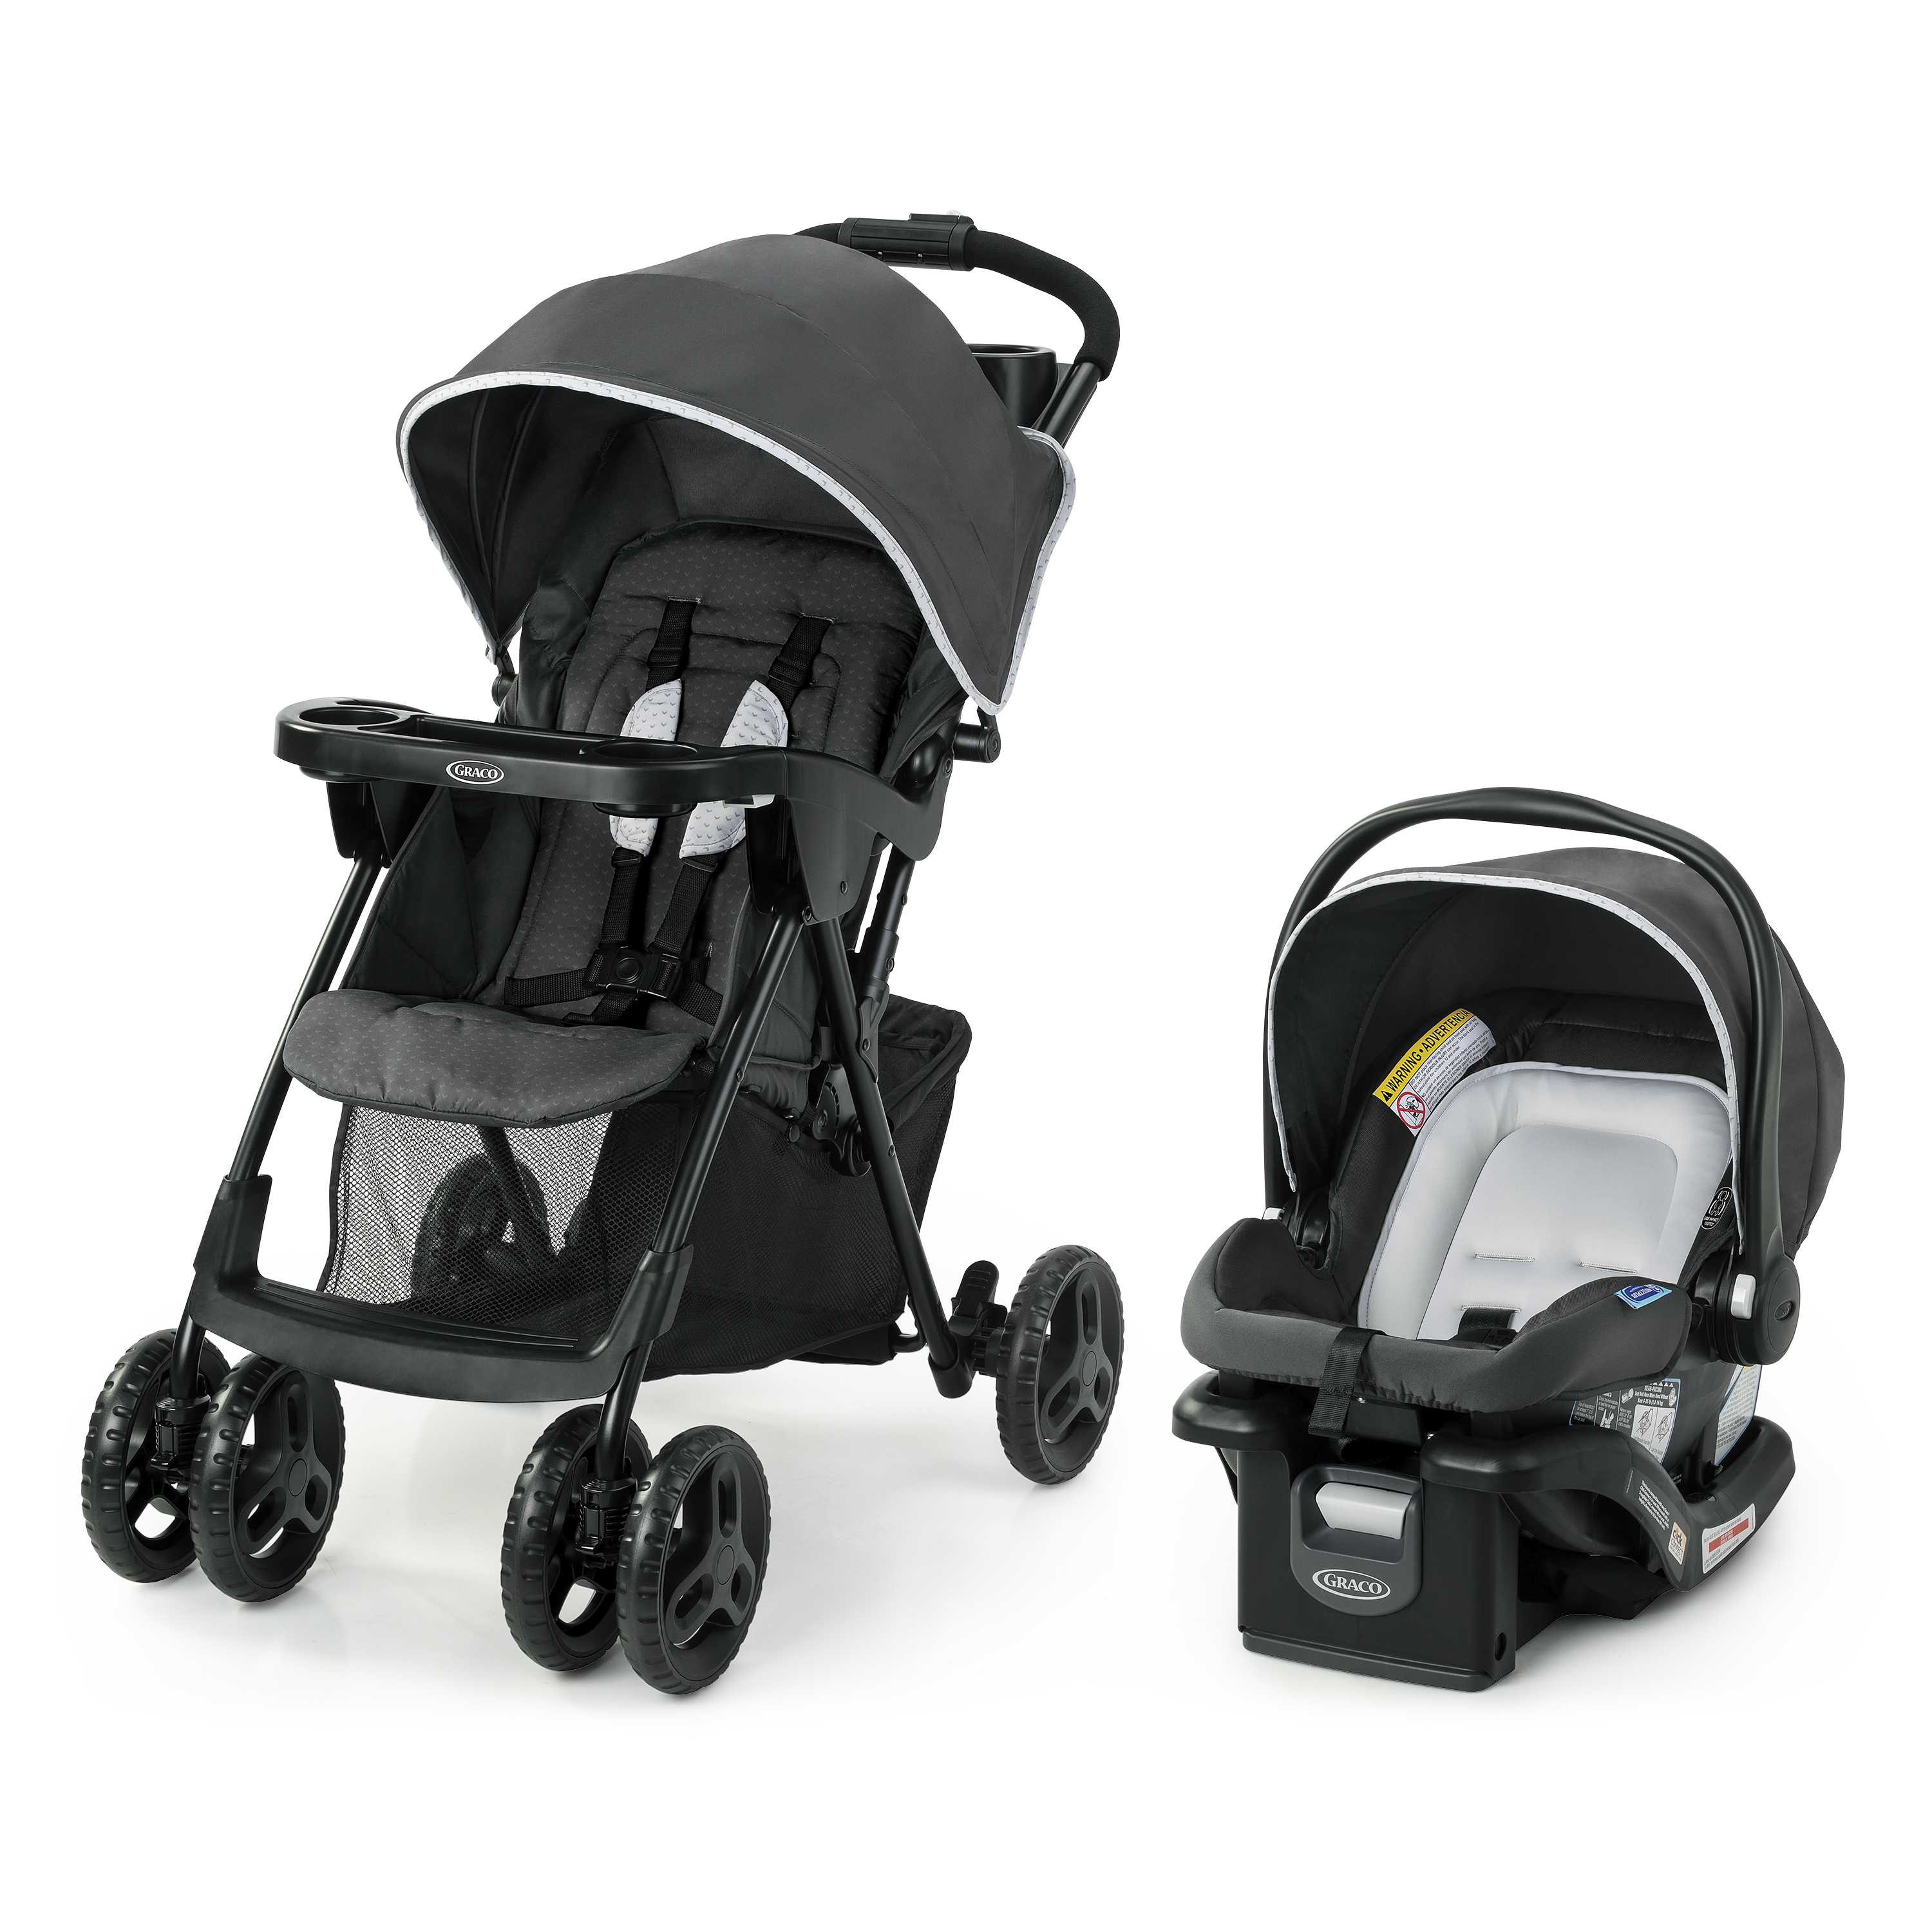 Graco Comfy Cruiser 2.0 Travel System with Infant Car Seat, Canton - image 1 of 7